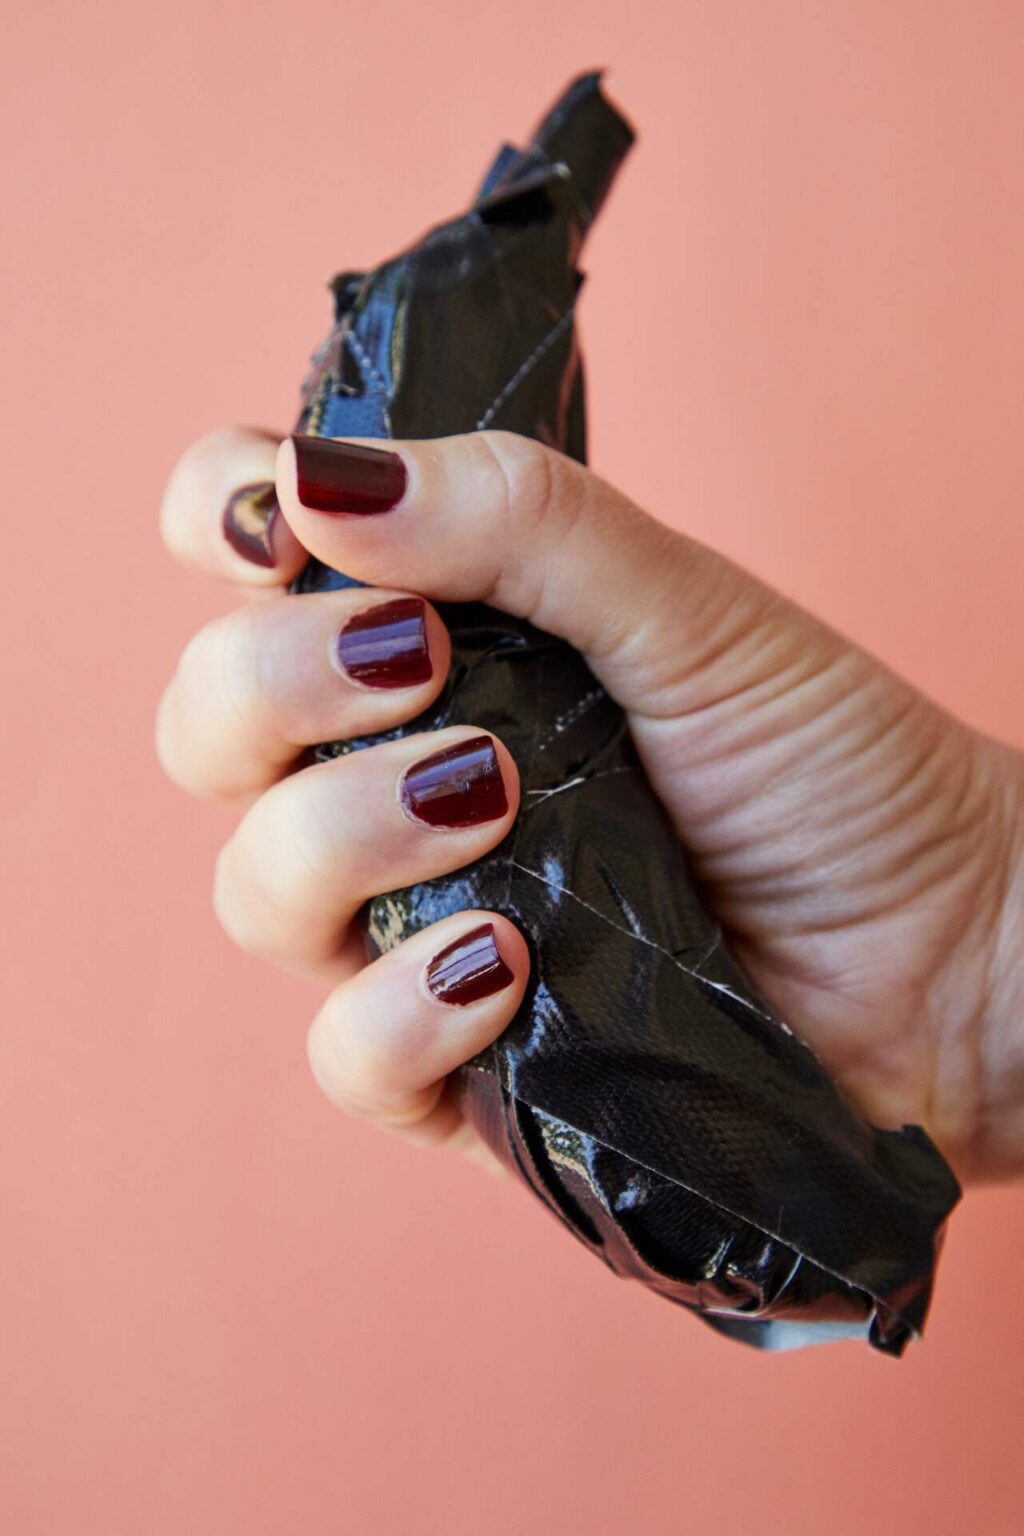 Hand with nails painted deep burgundy holds banana wrap in black duct tape.